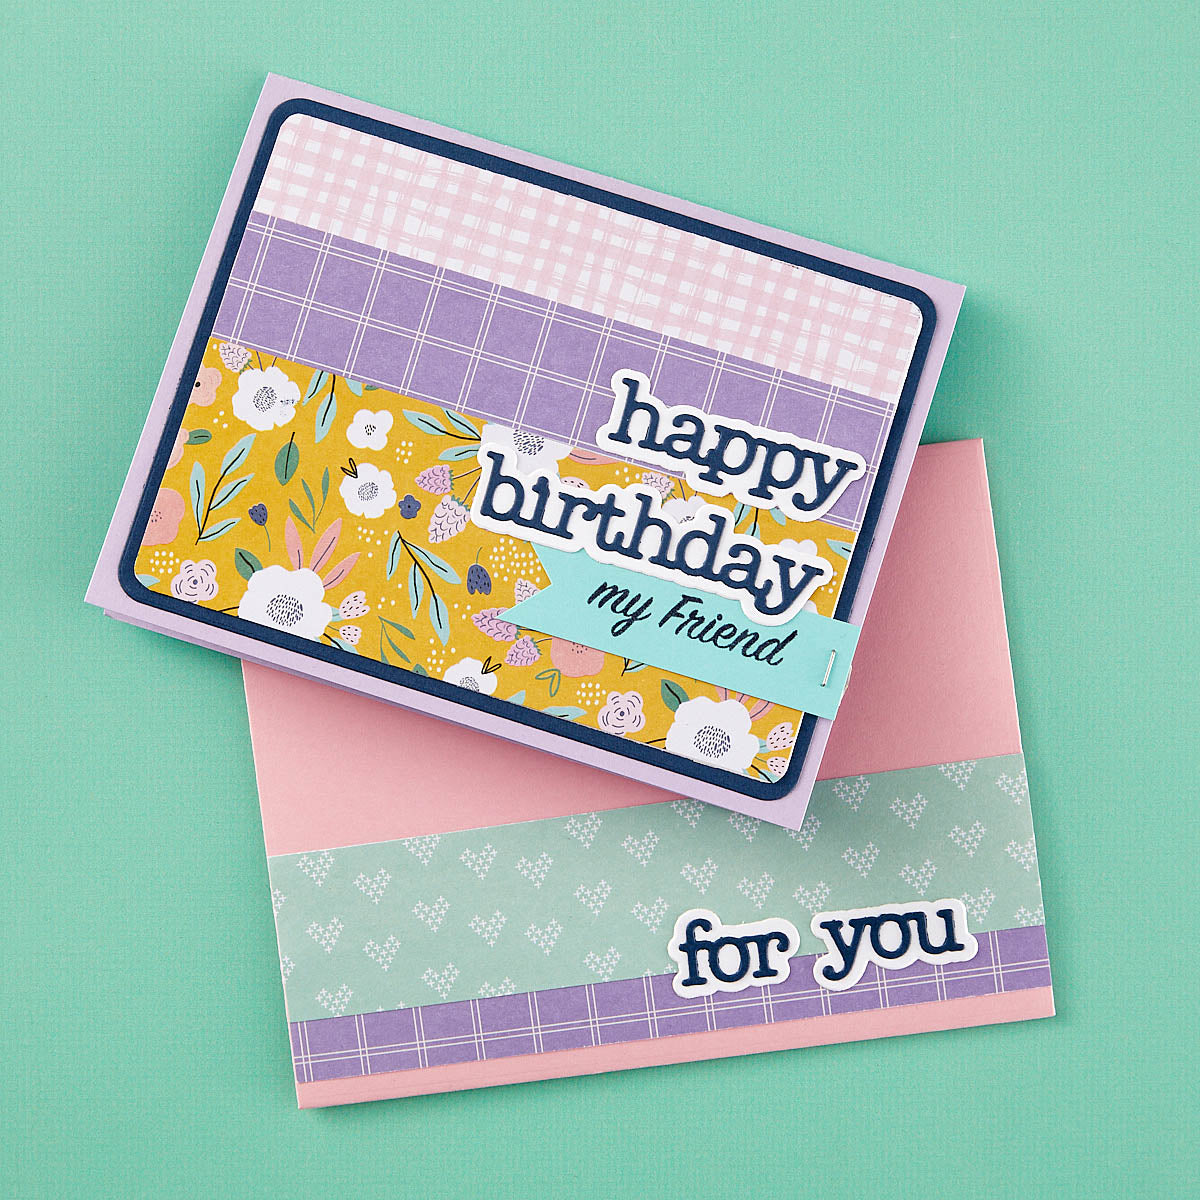 Spellbinders - A2 Gift Card Holder and Envelope Etched Dies from the All the Sentiments Collection by Stampendous